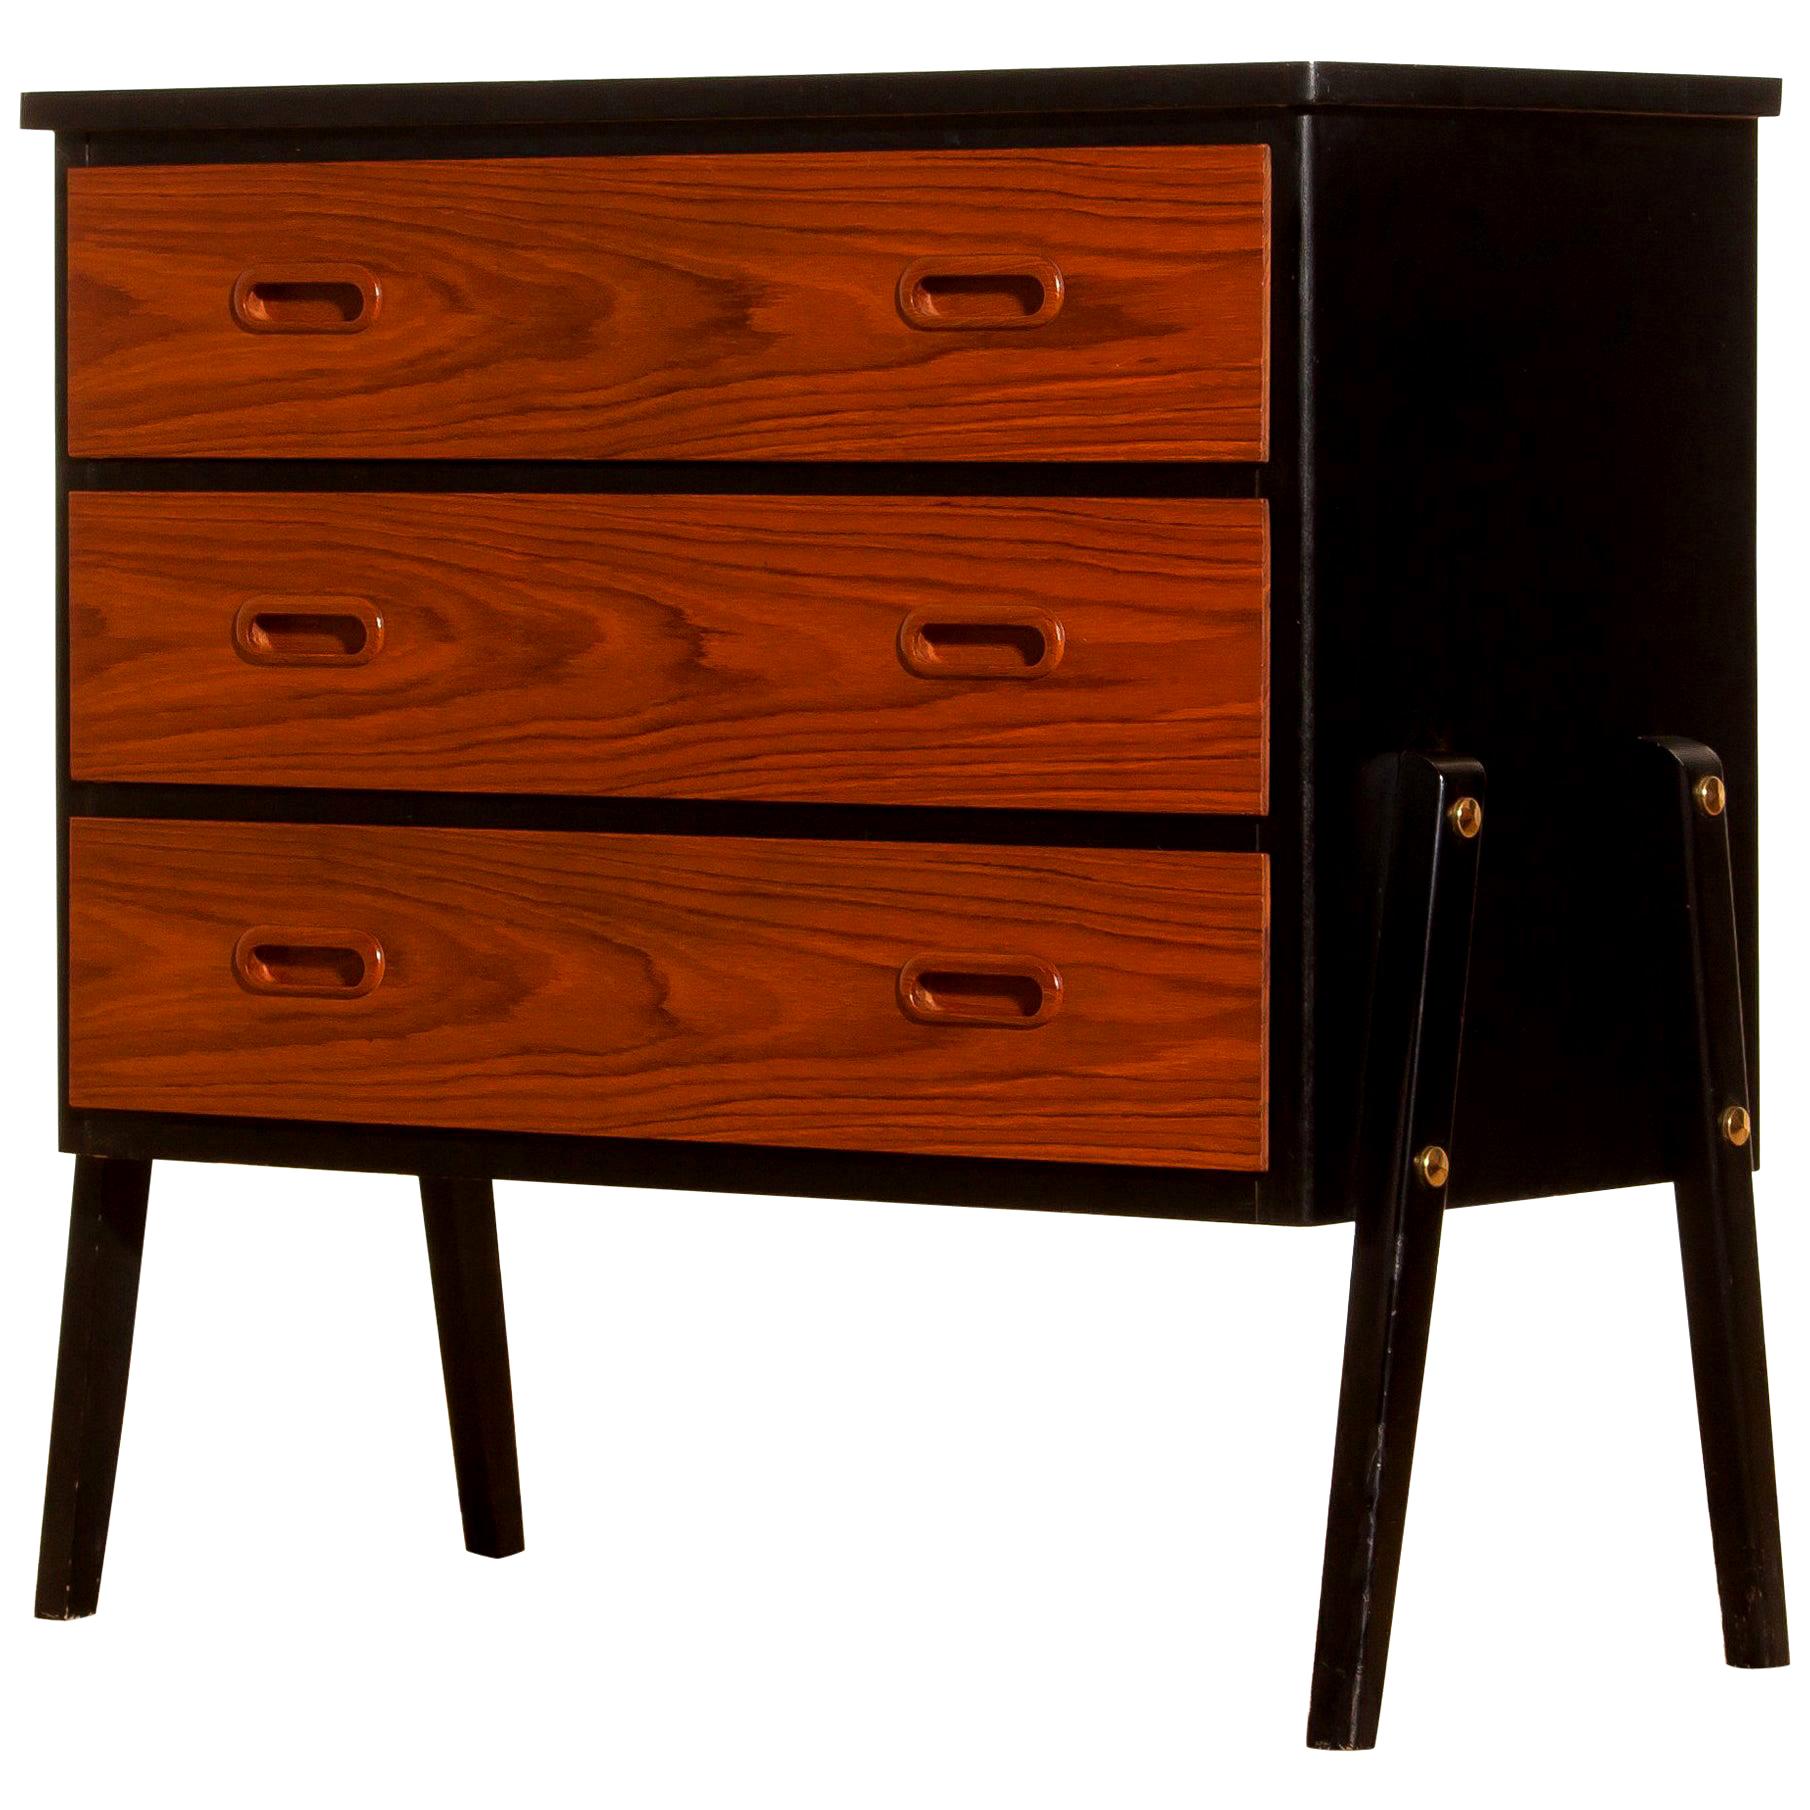 Beautiful small chest of drawers made by Gyllensvaans Möbler, Sweden (marked).
This chest of drawers is made of teak and has three drawers.
It looks great with the black details and is in a very nice condition.
Period, 1950s.
Dimensions: H 68 cm